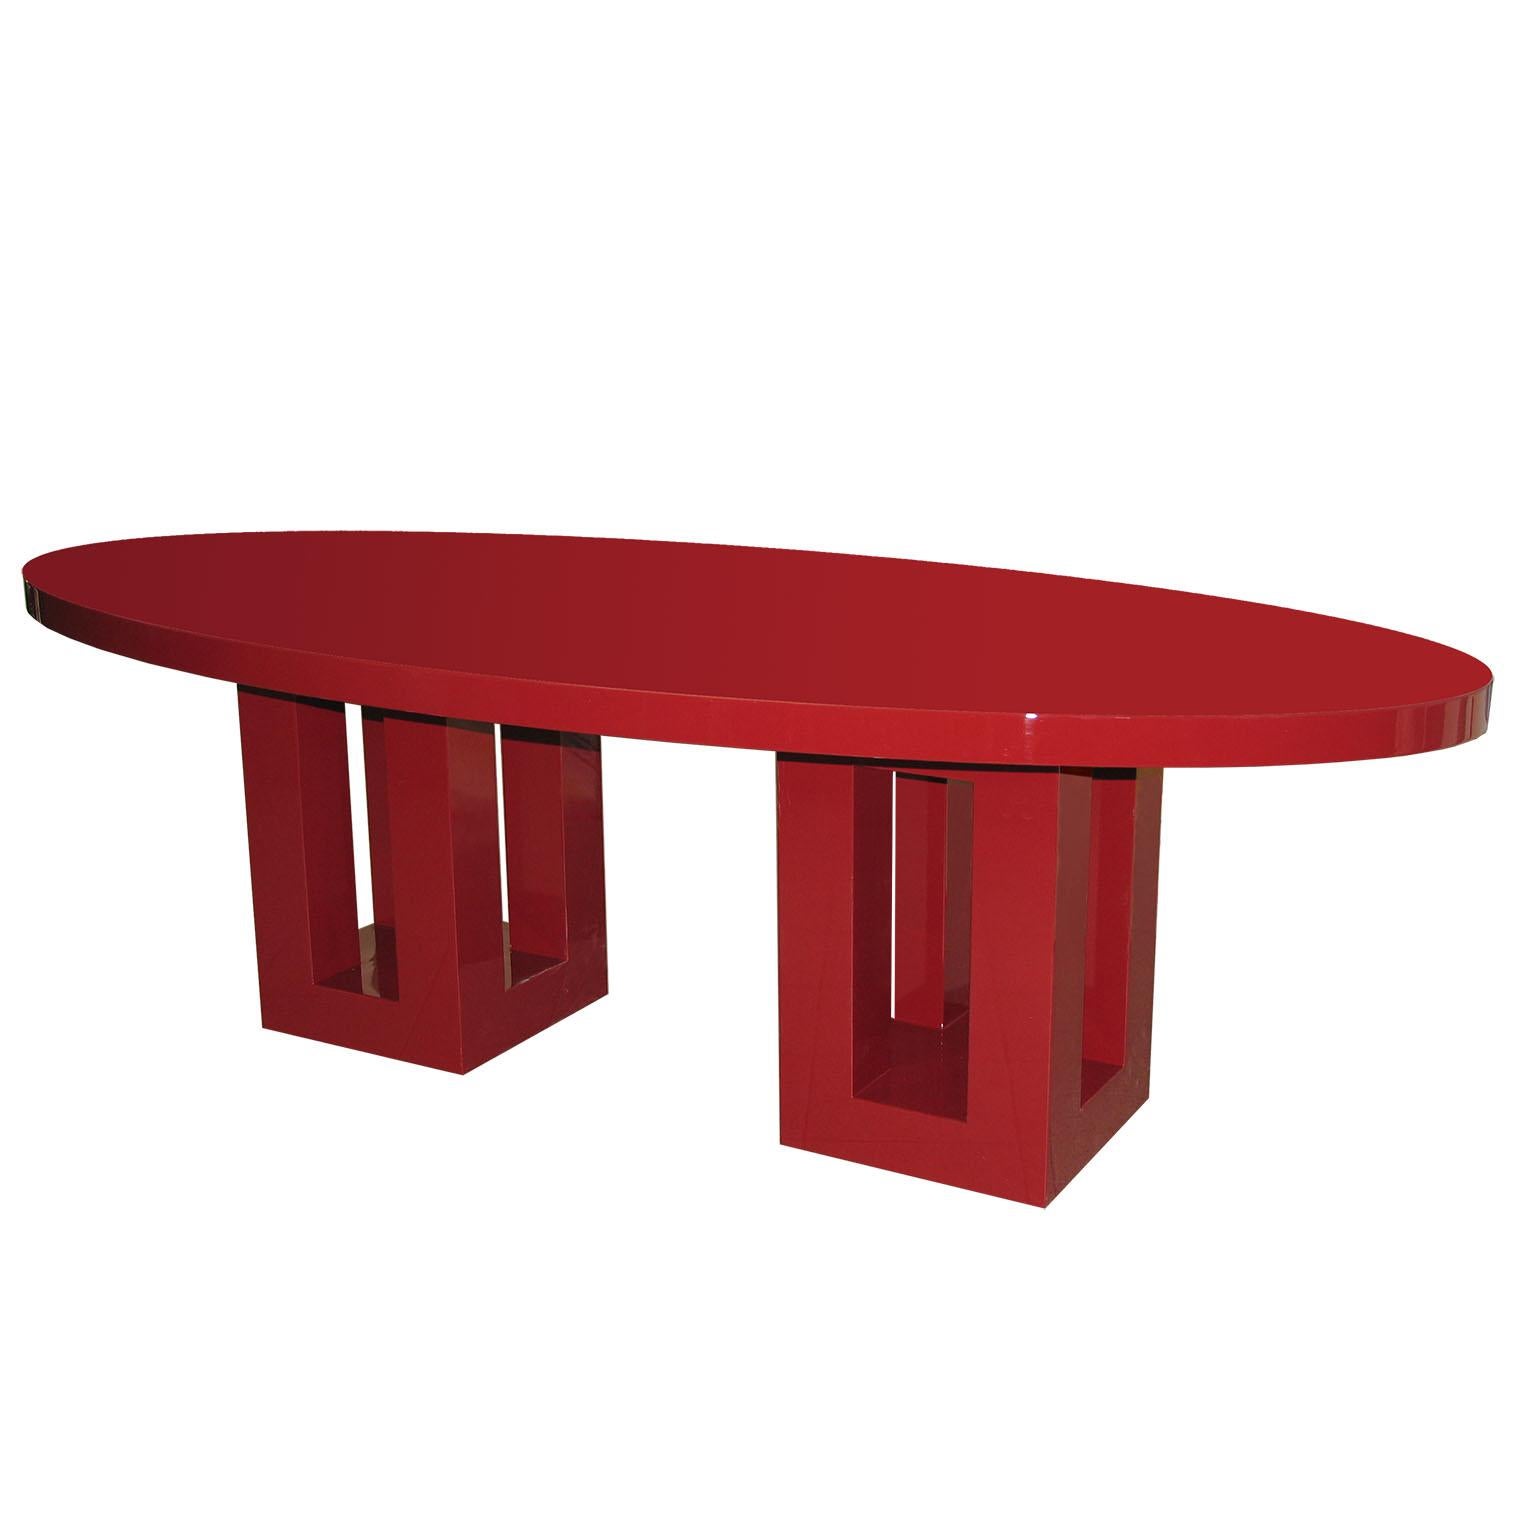 French Large Red Lacquer Oval Dinning Table. 8 Feet, Francois Champsaur, France 1990s For Sale